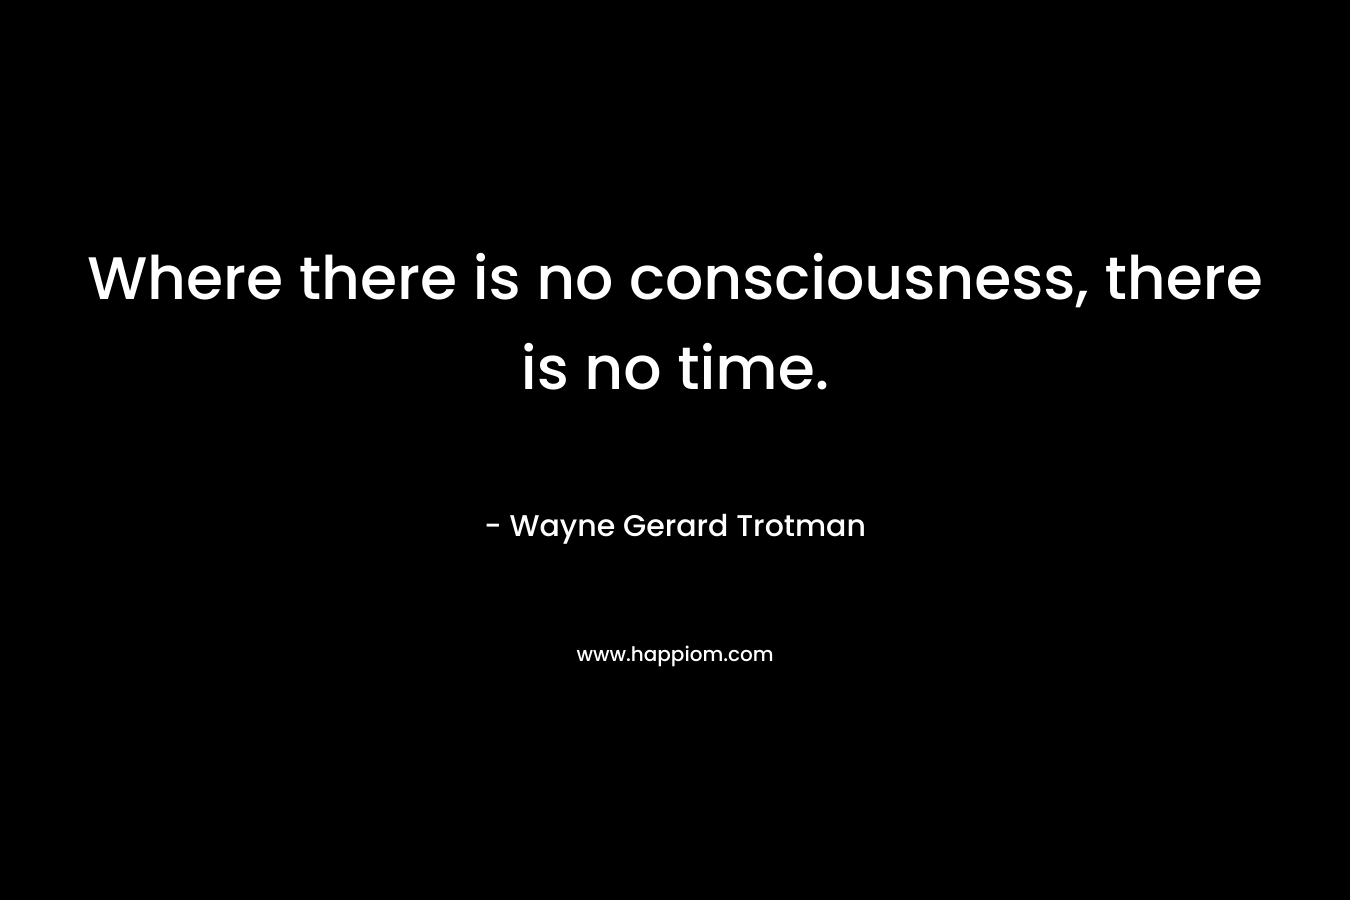 Where there is no consciousness, there is no time.